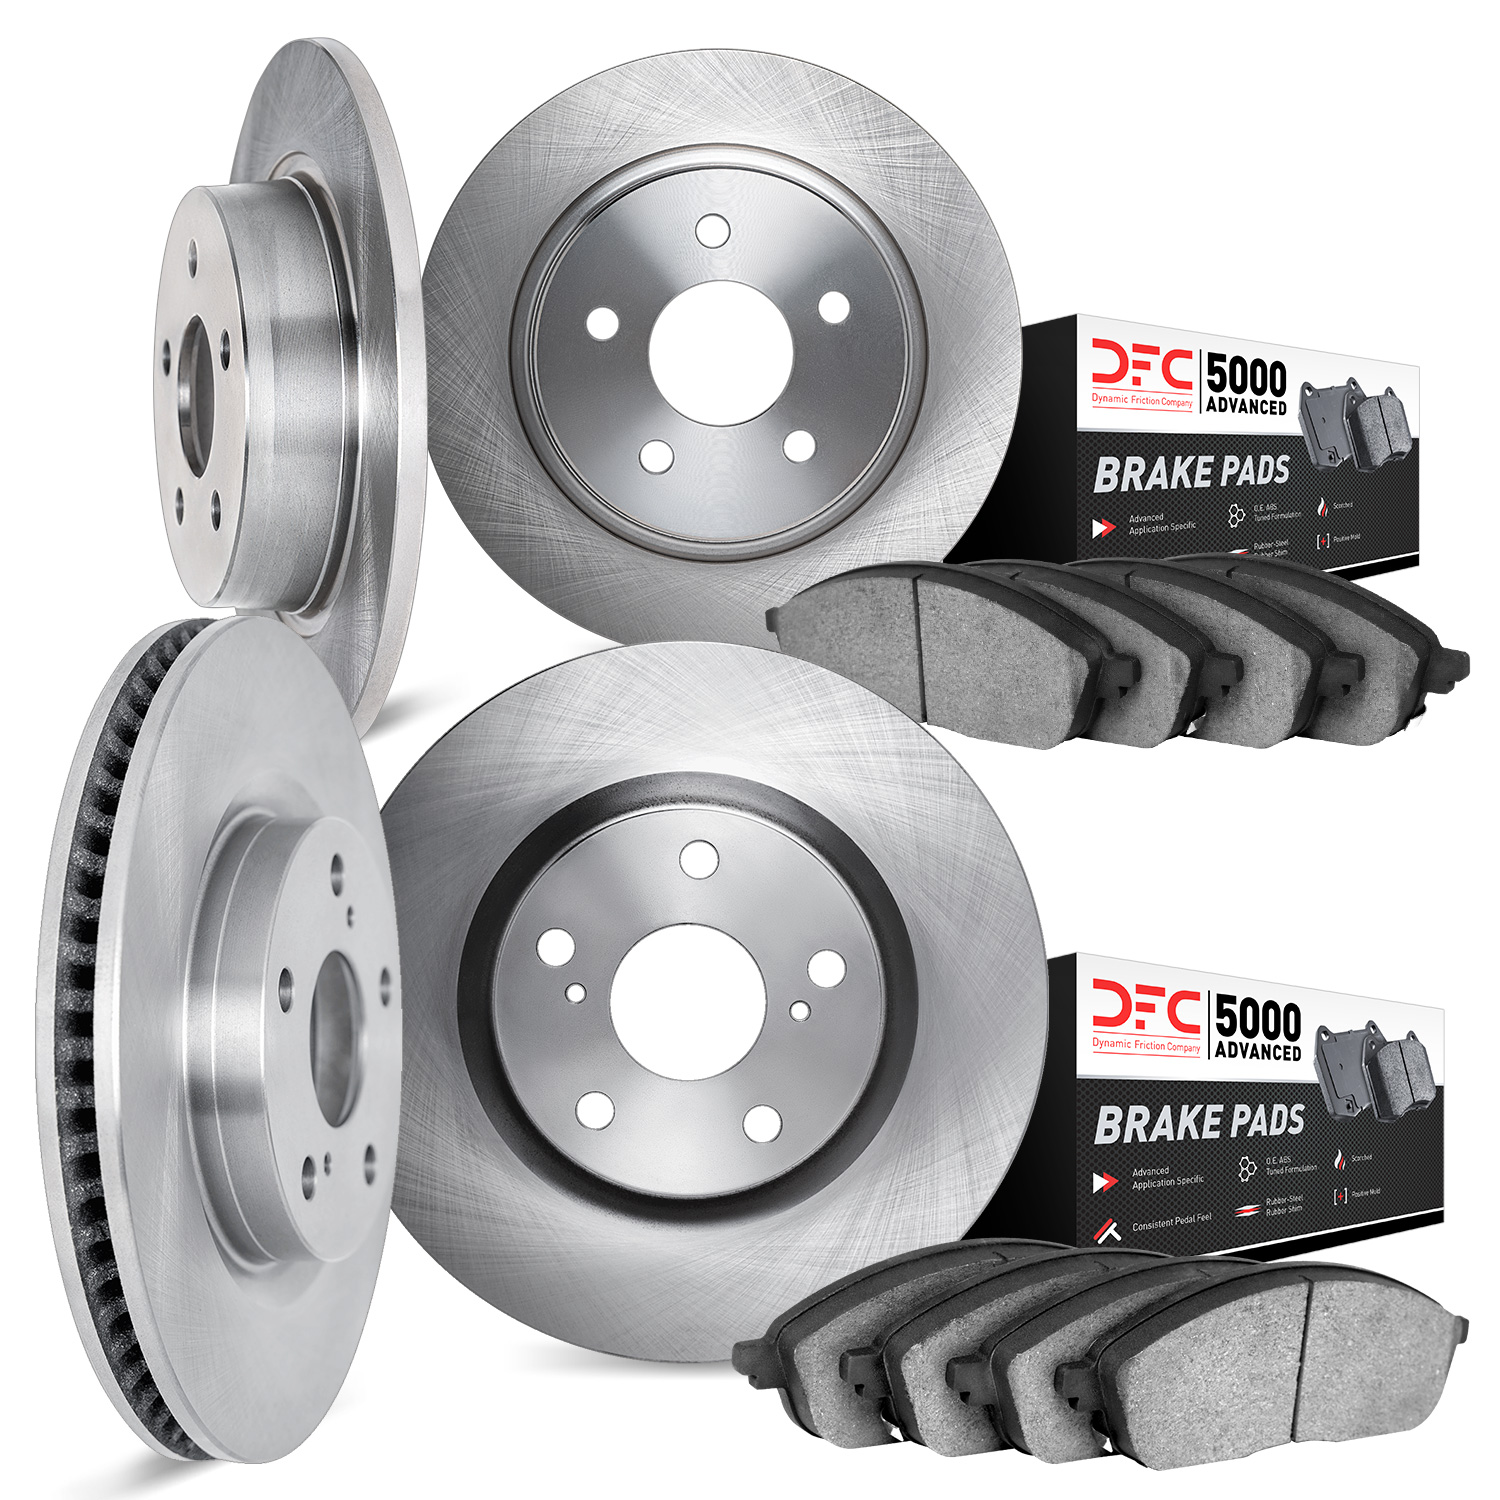 6504-92042 Brake Rotors w/5000 Advanced Brake Pads Kit, 2006-2007 BMW, Position: Front and Rear